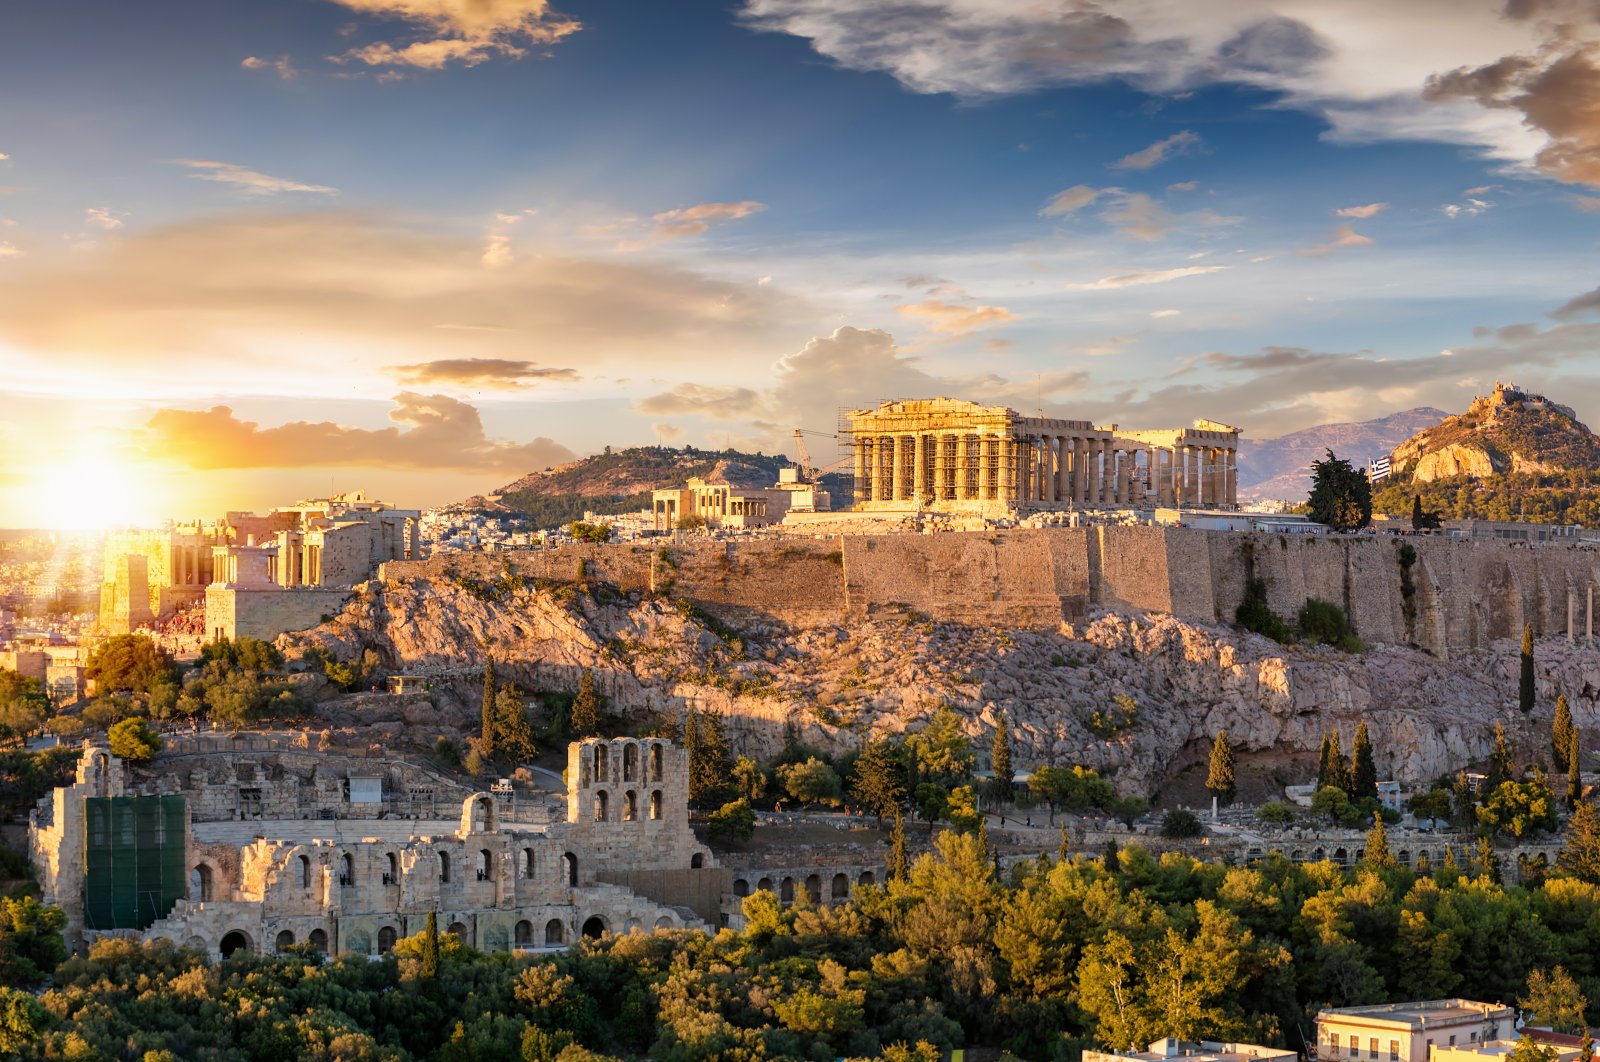 A view from the Acropolis of Athens in Greece with the Parthenon temple on top of the hill during a summer sunset. (Shutterstock)